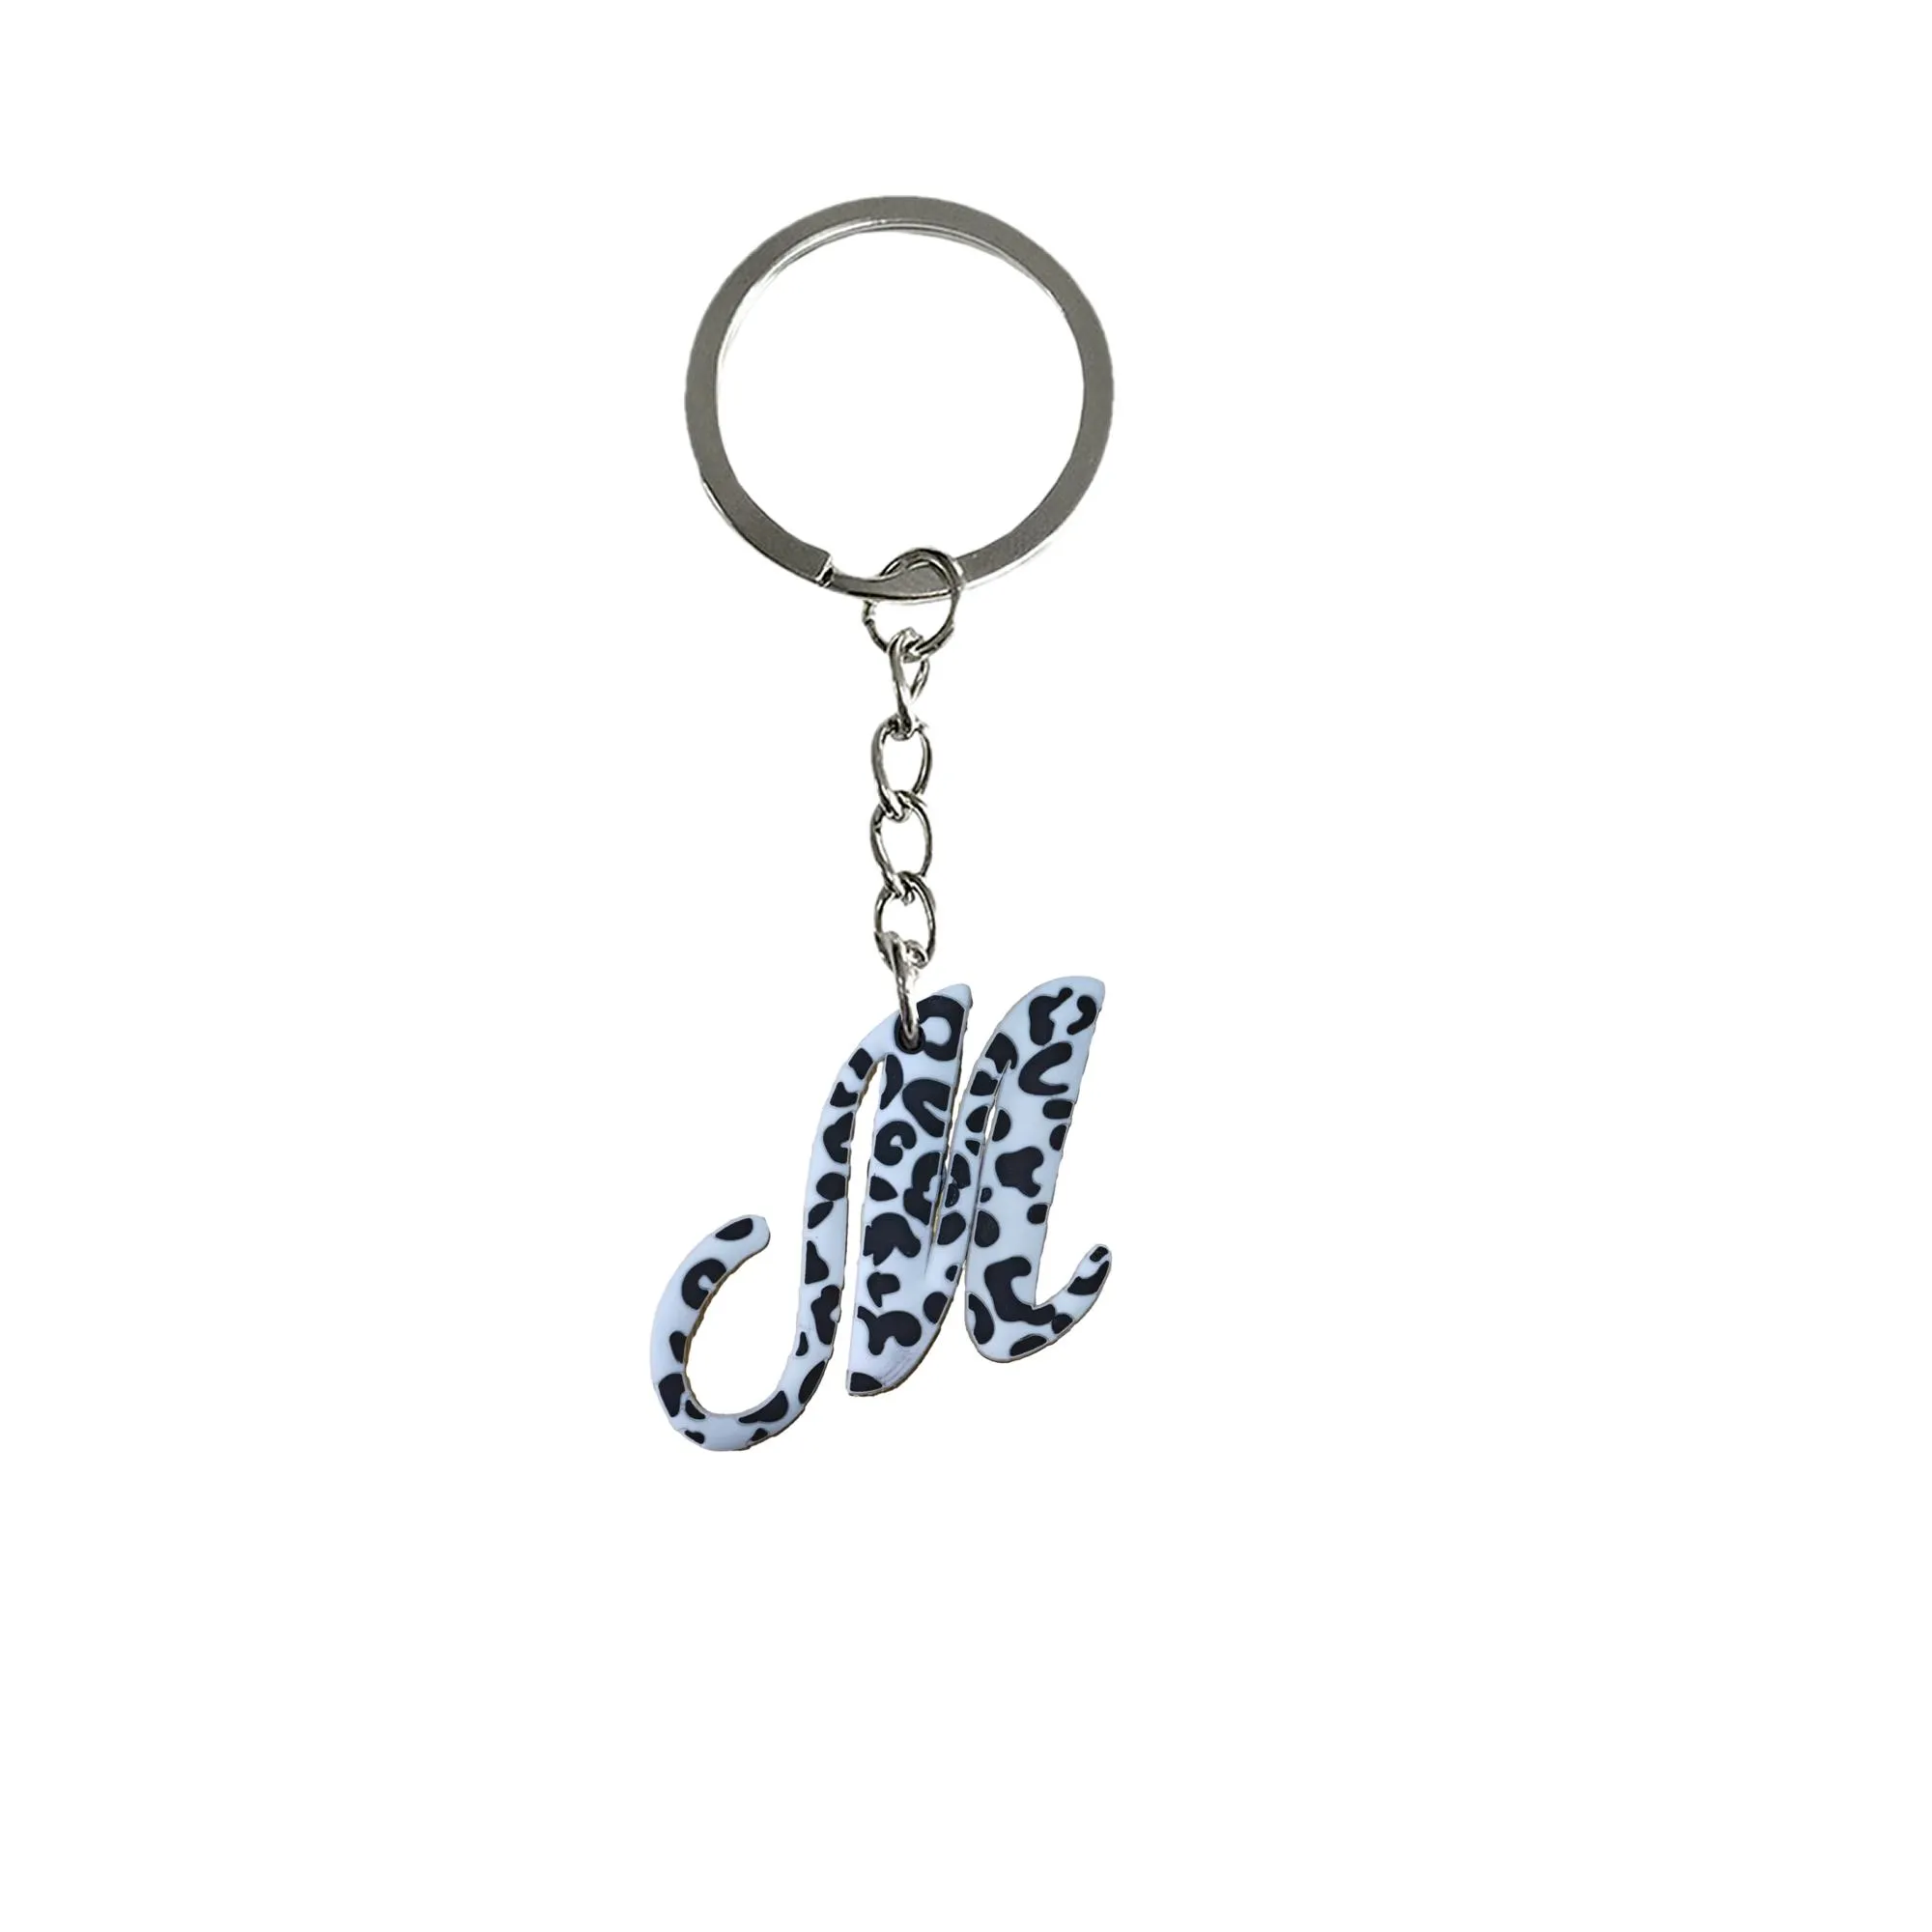 zebra large letters keychain keychains tags goodie bag stuffer christmas gifts and holiday charms key chain ring gift for fans keyring backpack car suitable schoolbag classroom school day birthday party supplies boys